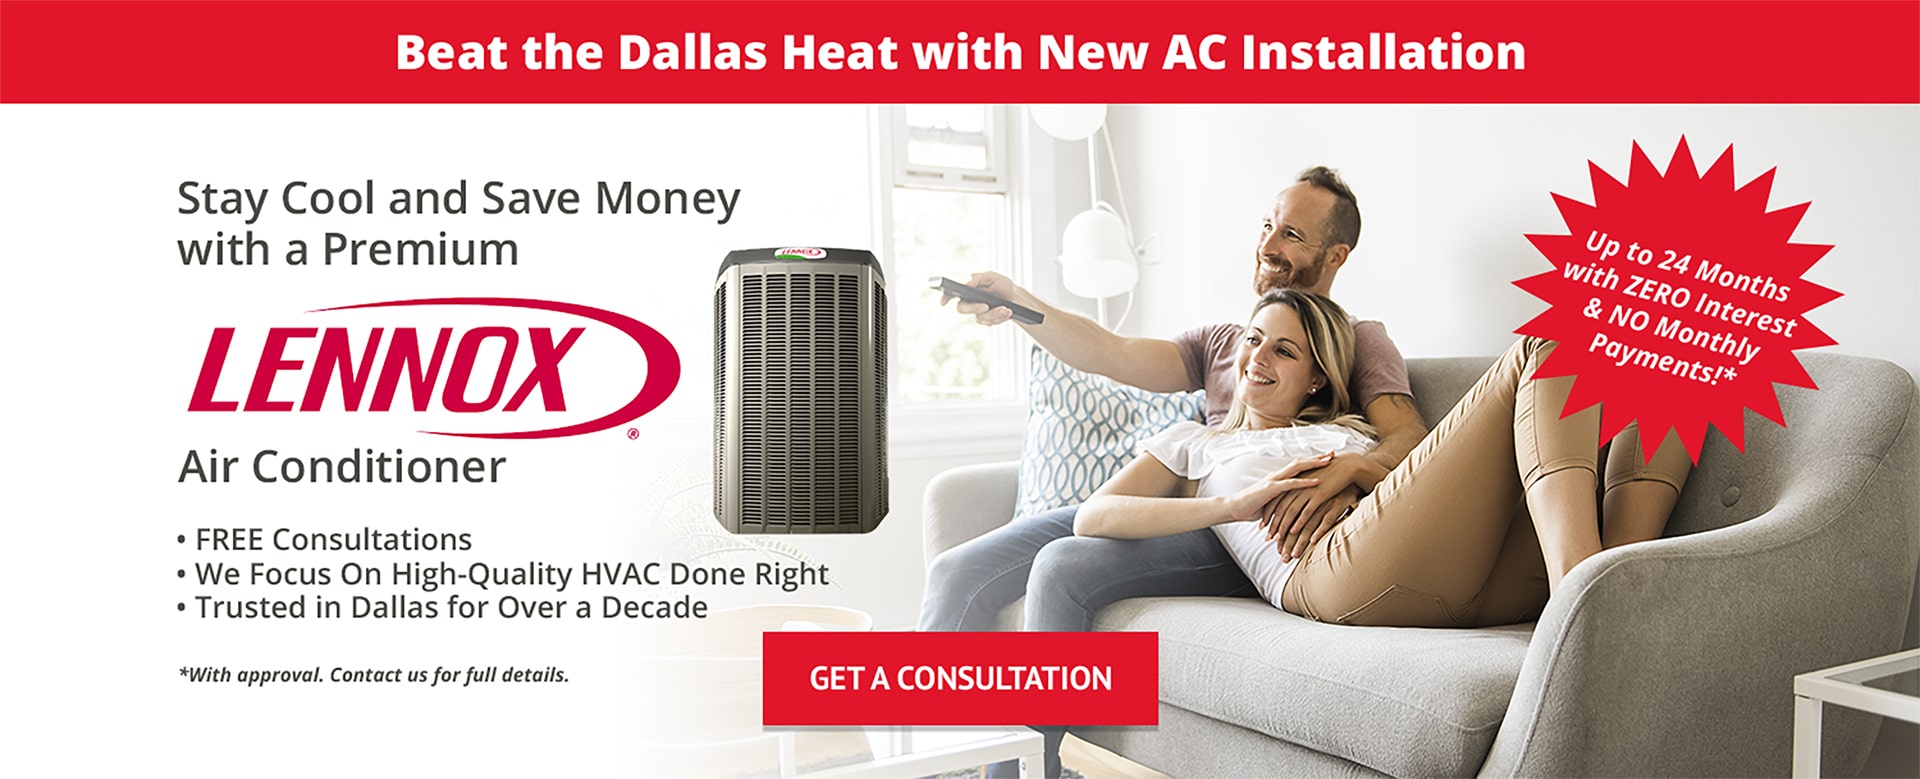 Dallas A/C Installation & Replacement Services